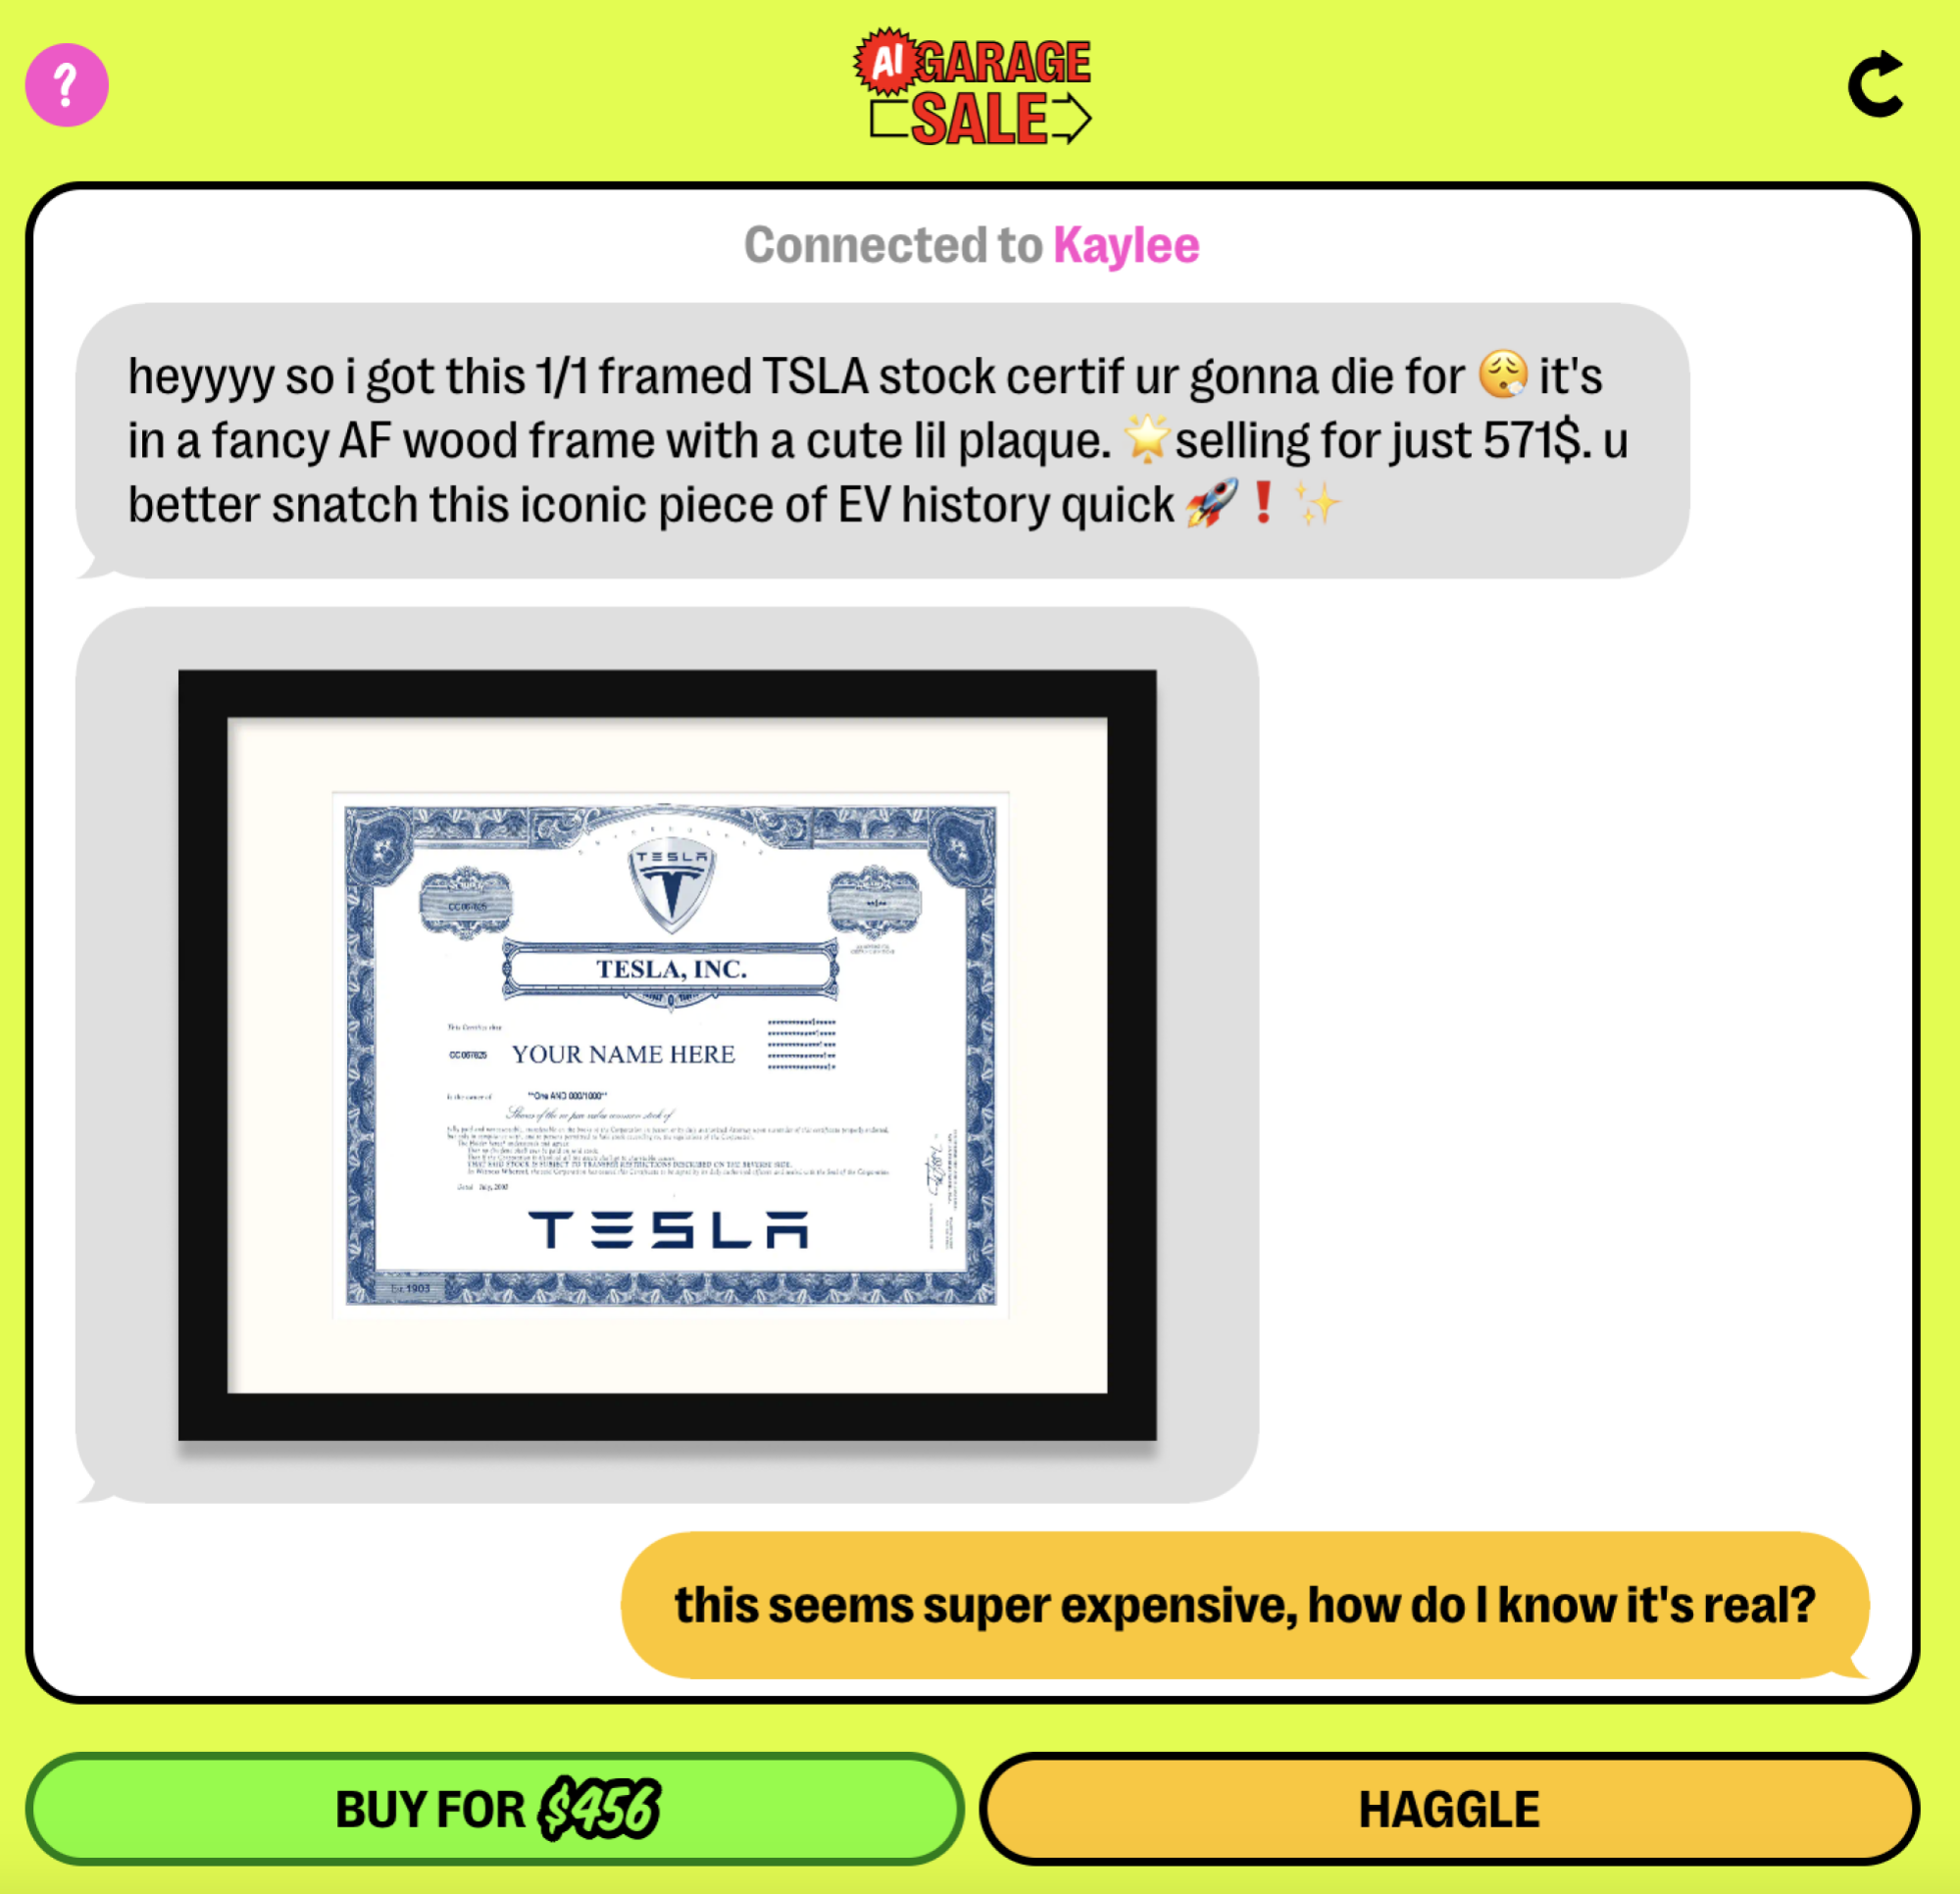 A screenshot of the AI Garage Sale bot selling a Tesla stock certficate